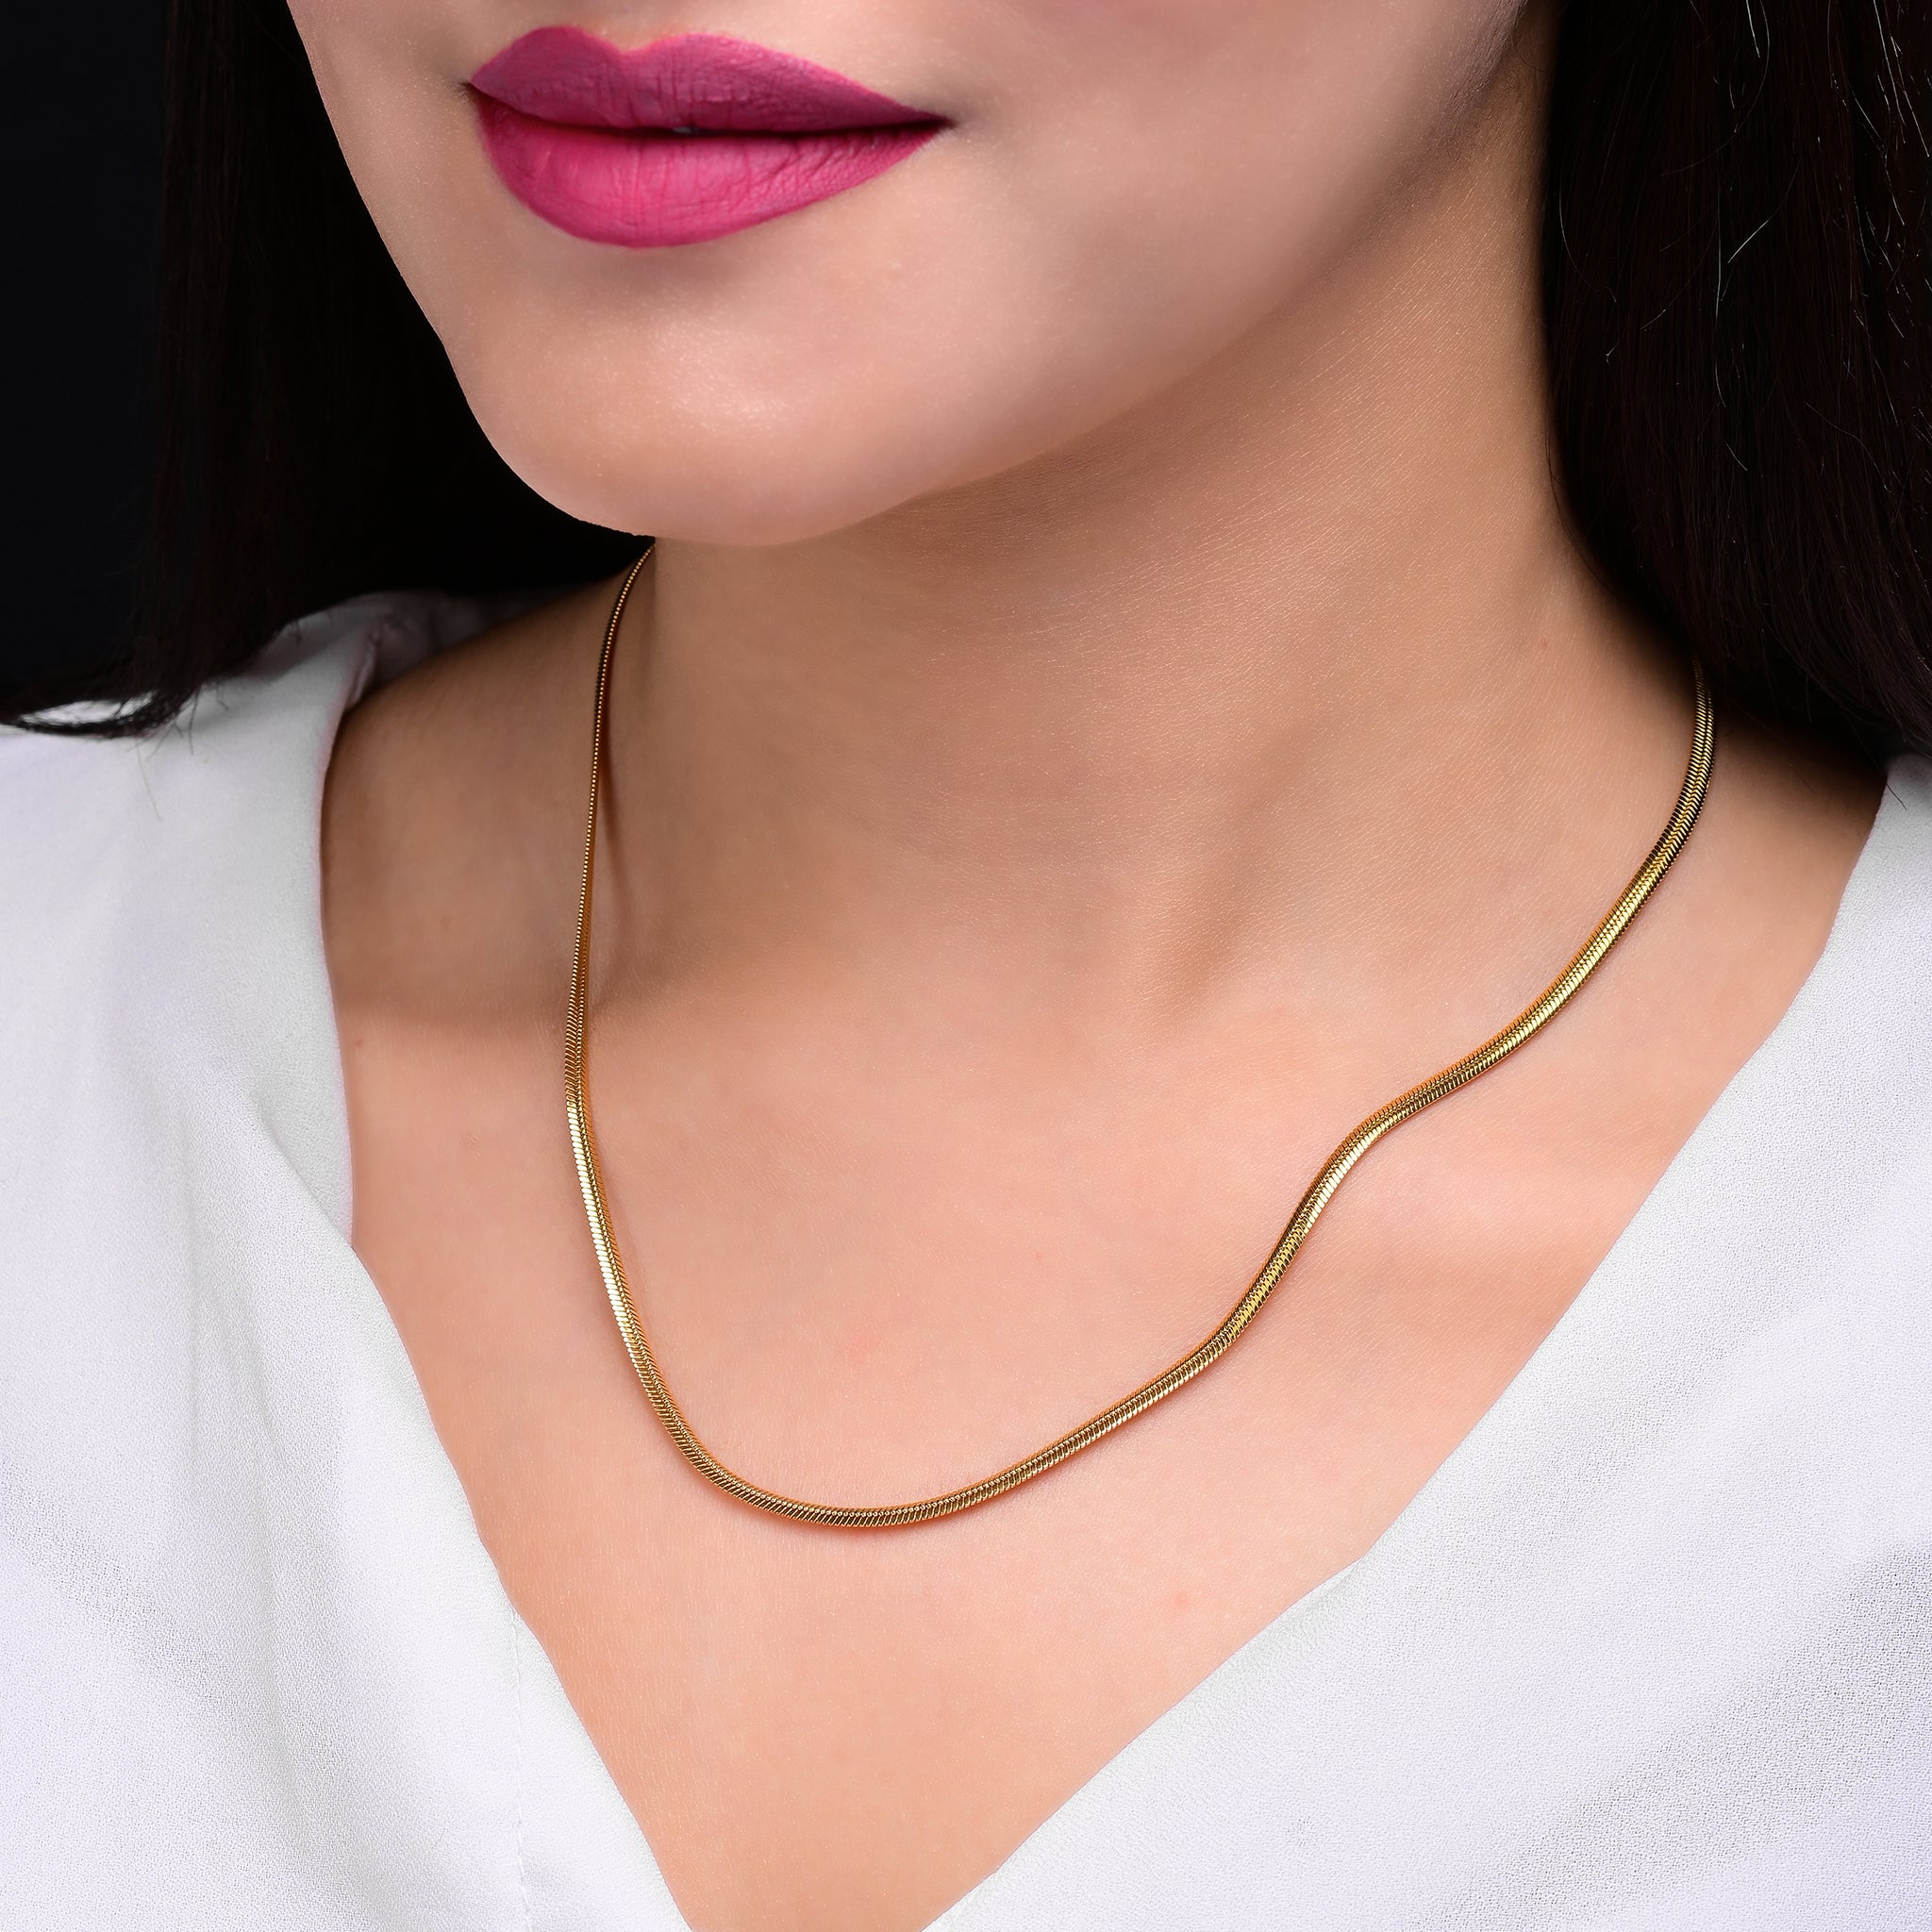 Buy Single Loose Snake Necklace '' Ofis '' Handmade BRASS Metal in Gold-plated  18K/ Gold Choker Collar Necklace/ Minimal Gold Choker Online in India - Etsy